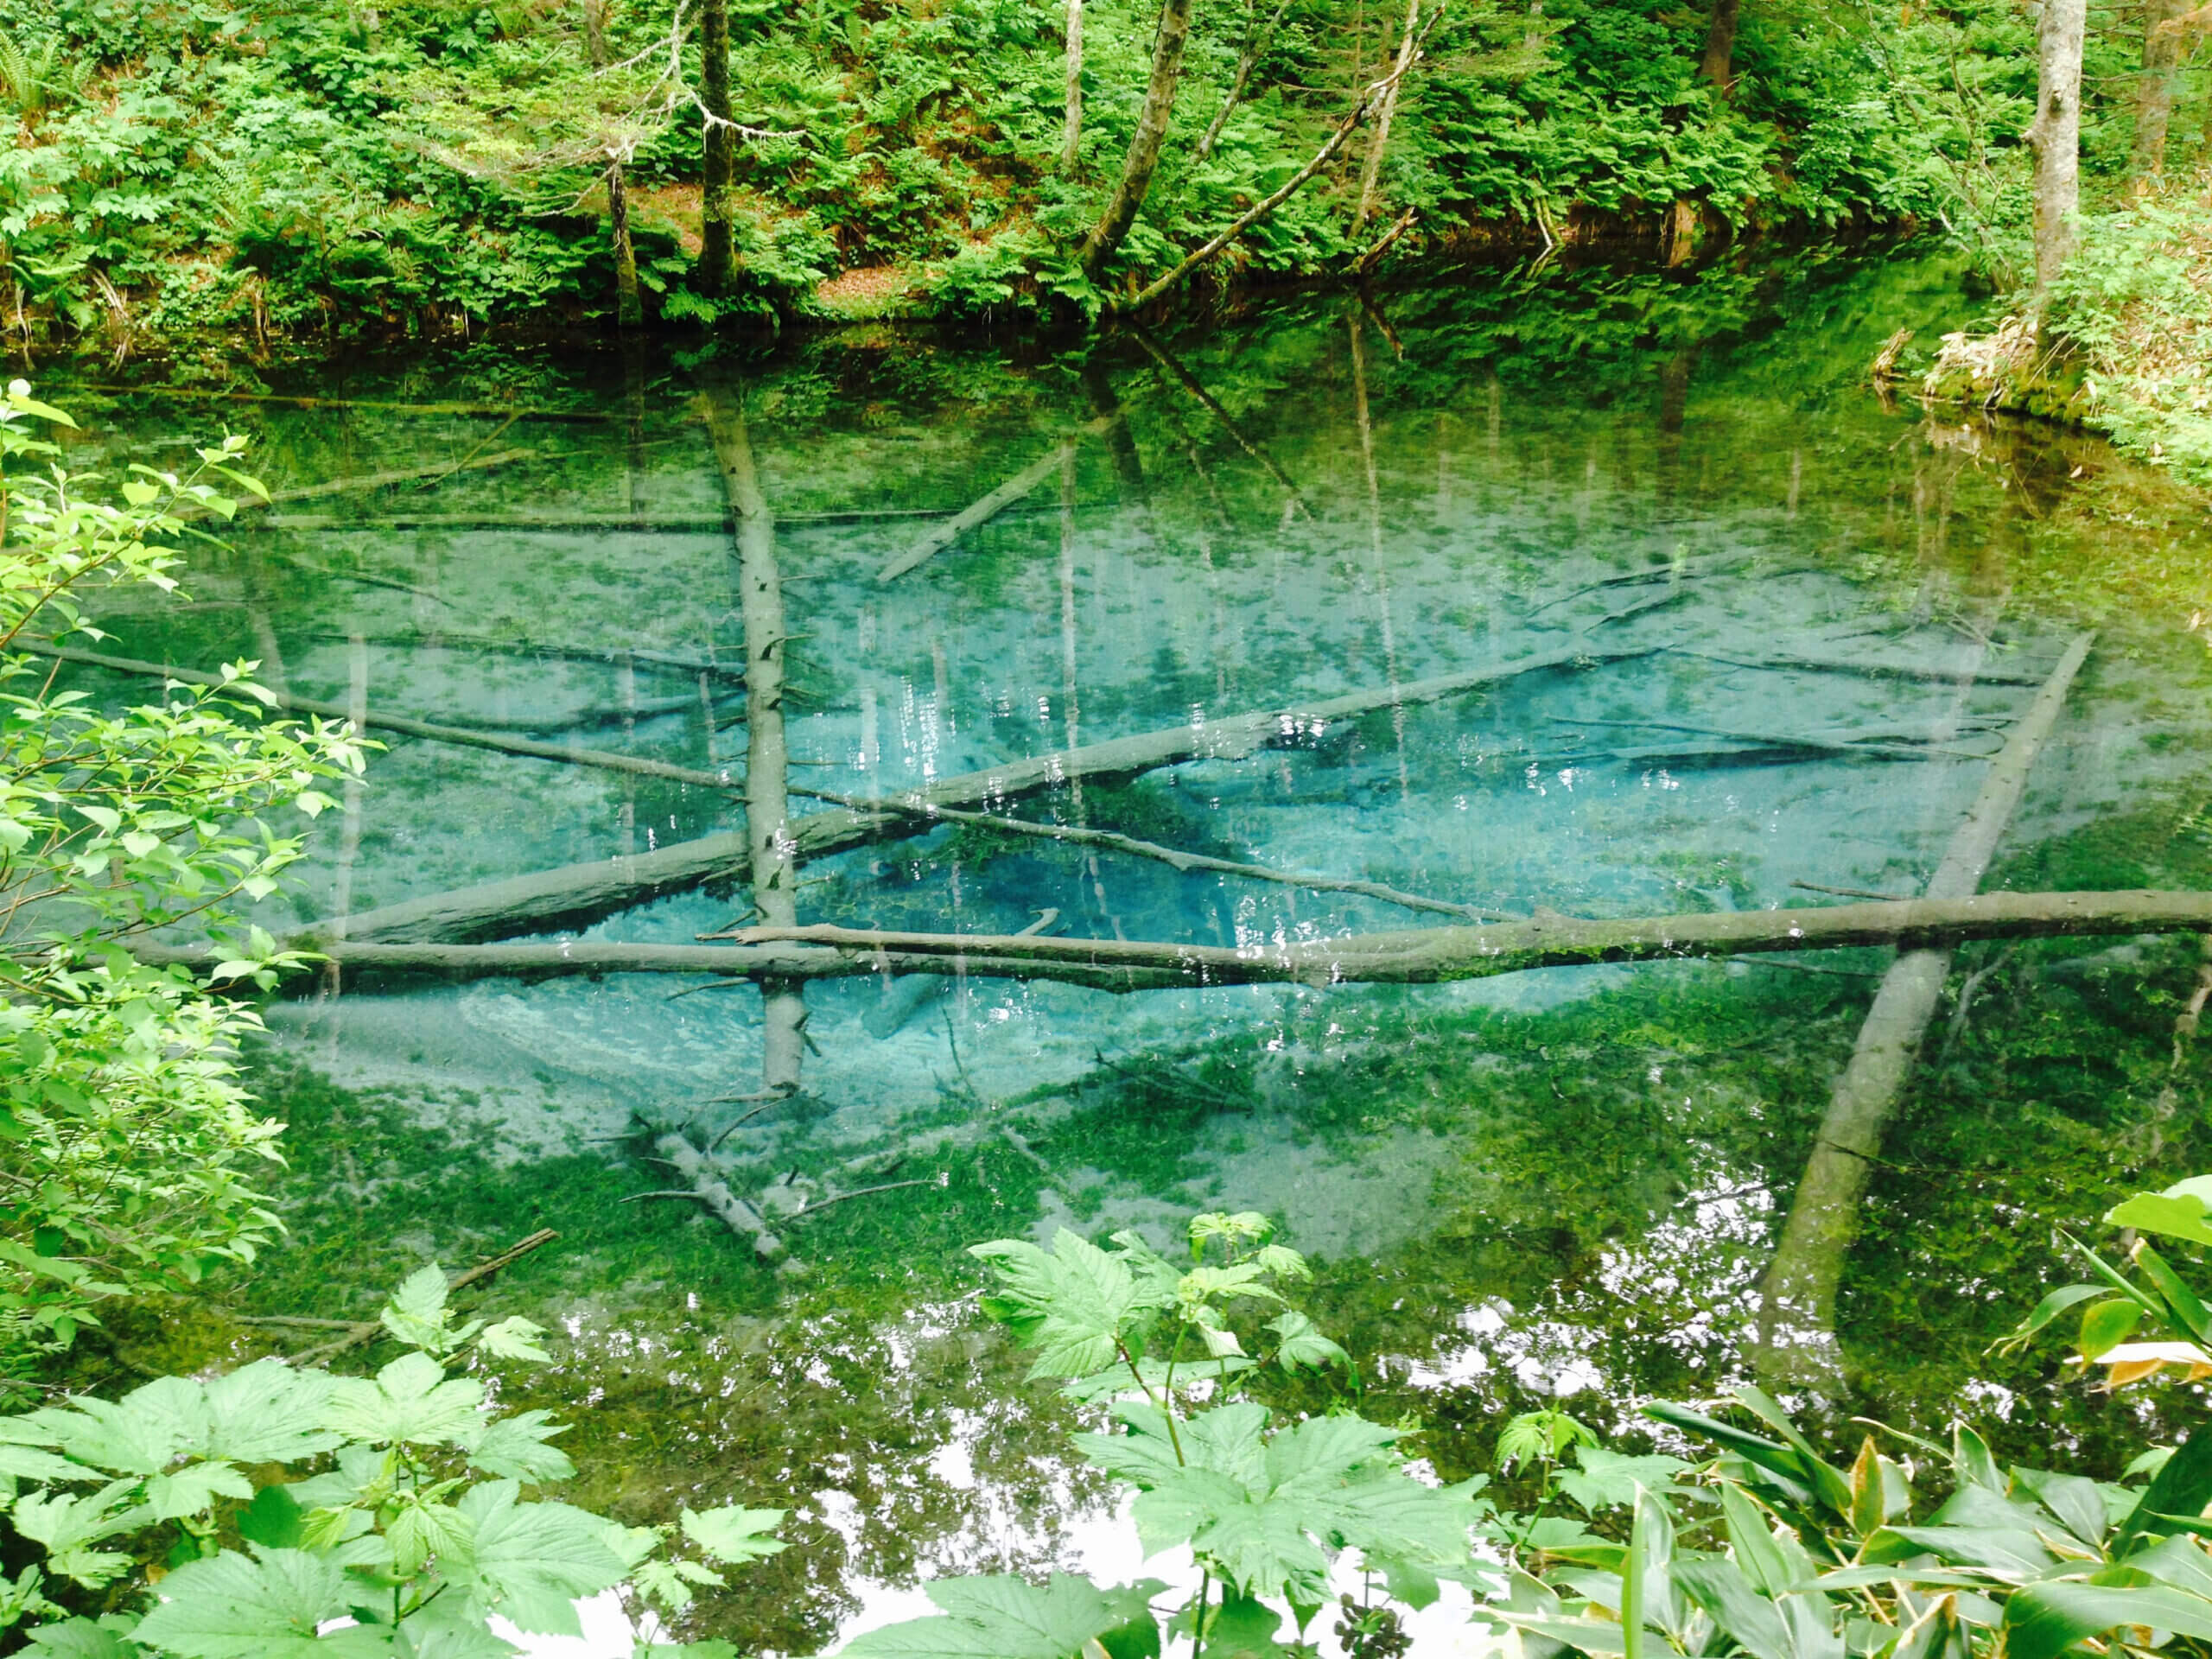 Kaminoko Pond: A Mystical Pond Deep in the Forest